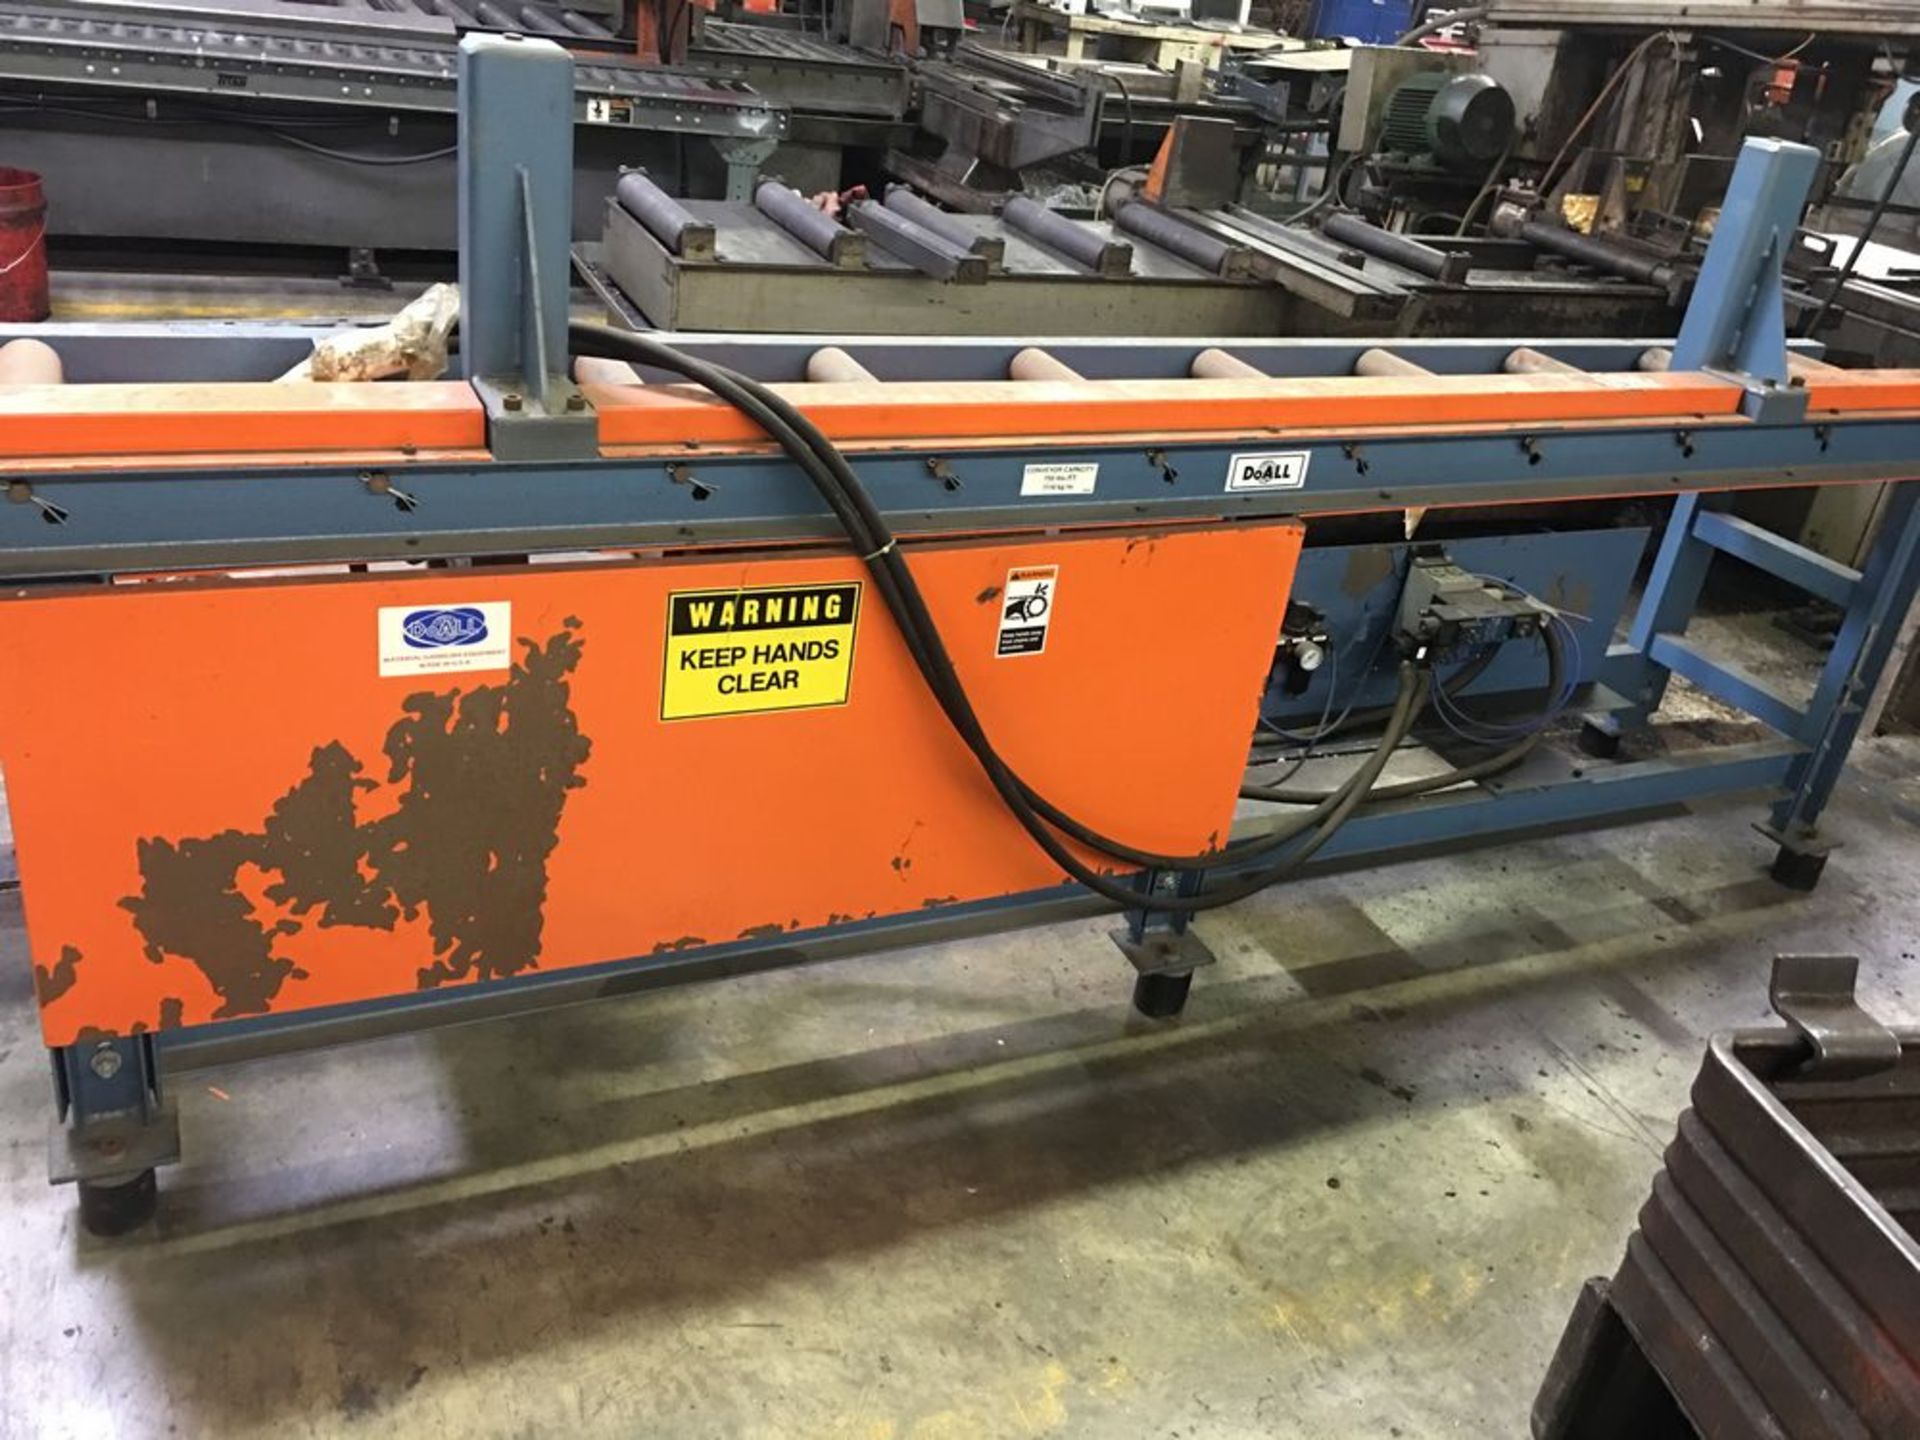 DoAll Automatic Band Saw with Auto Bundle Loader Model C3350NC, S/N 566-08135R1, NEW 2013 - Image 6 of 15